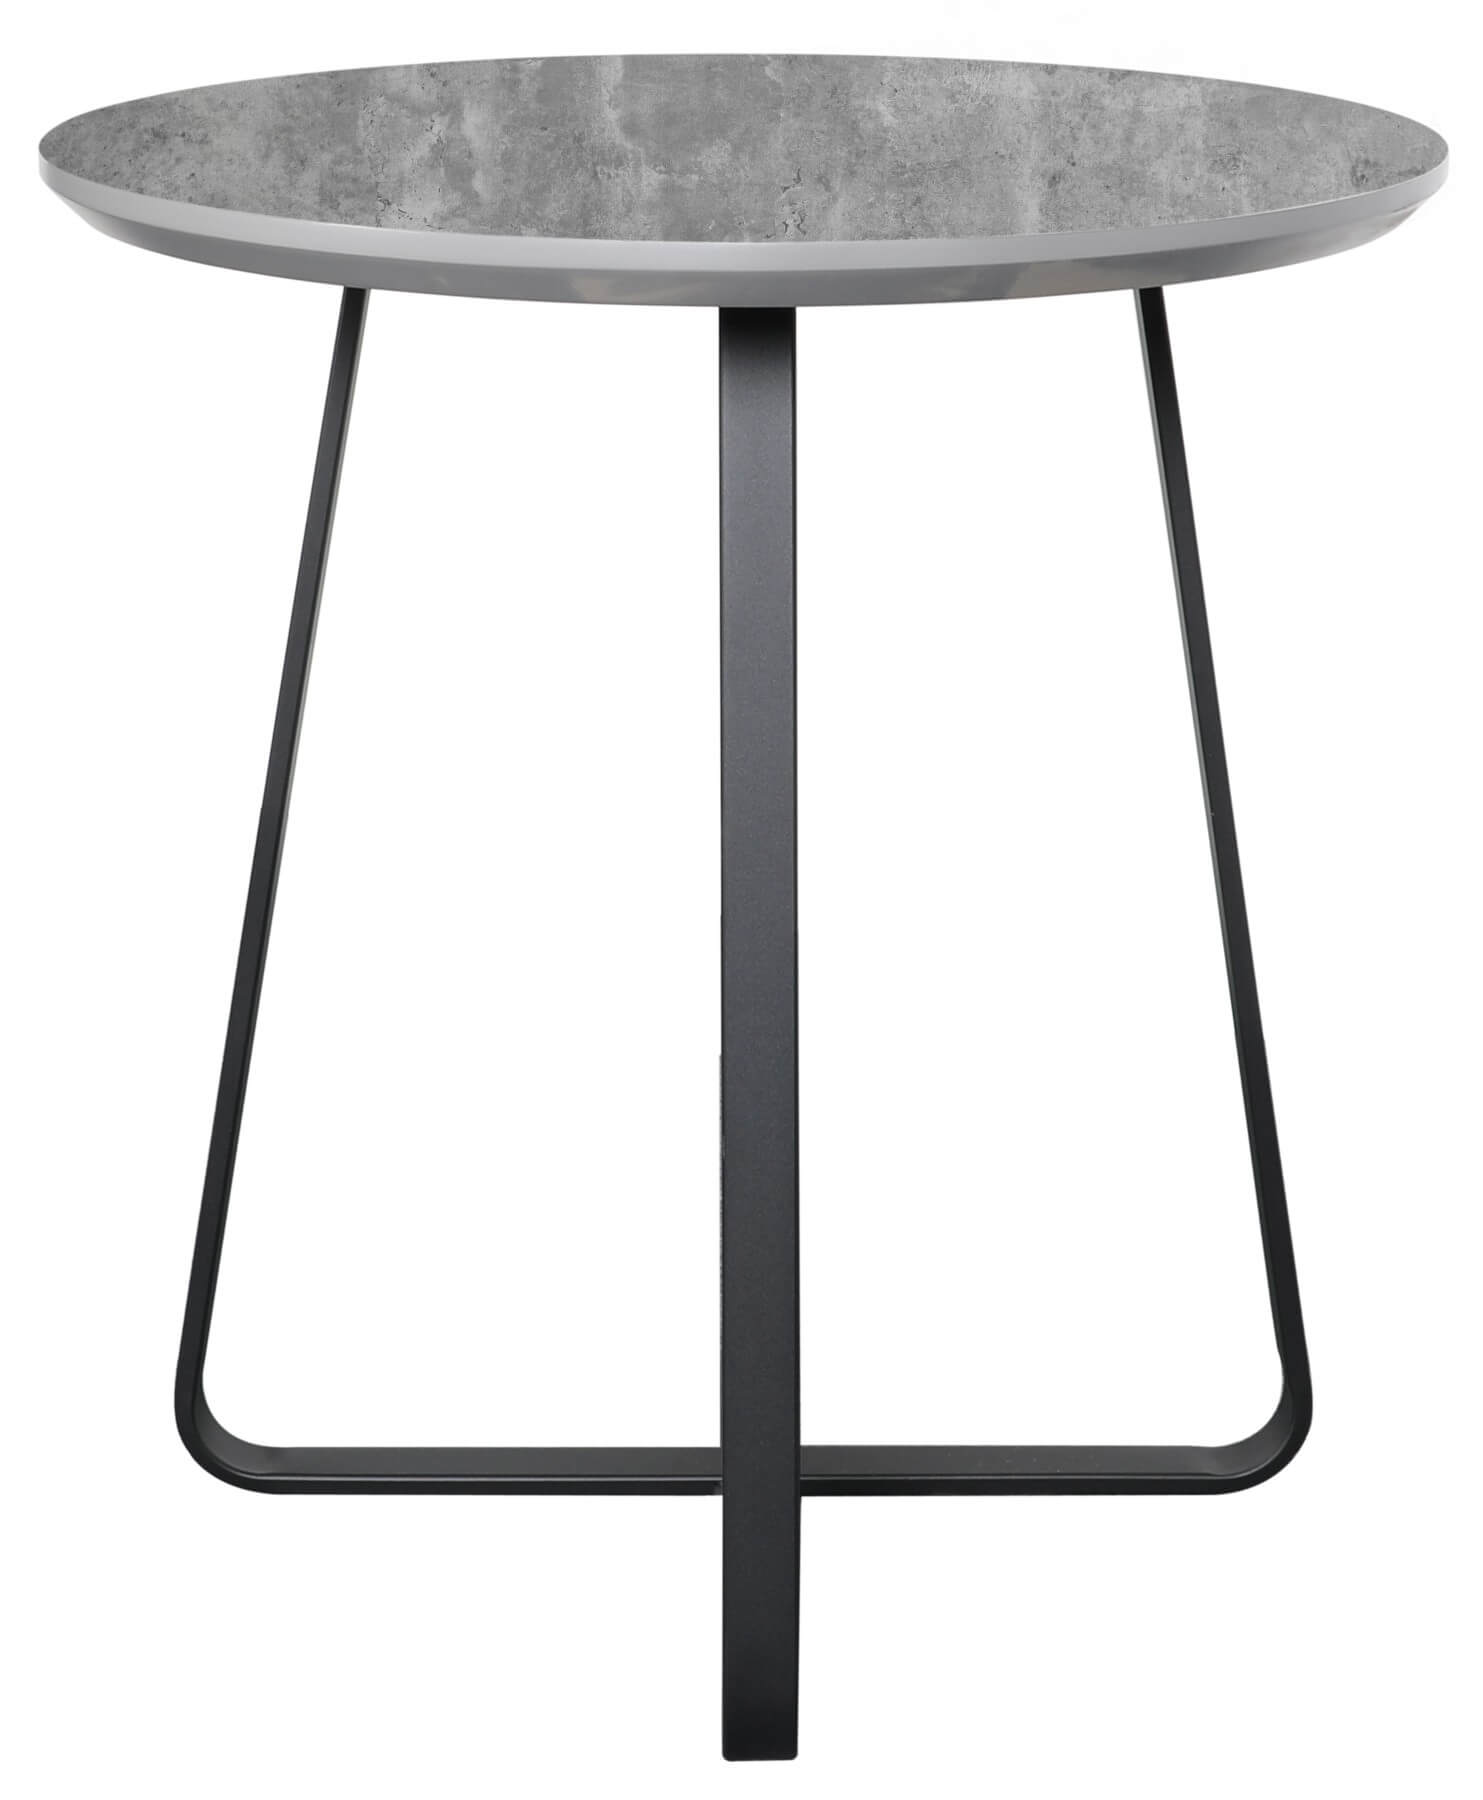 Showing image for Fengo wine table - round